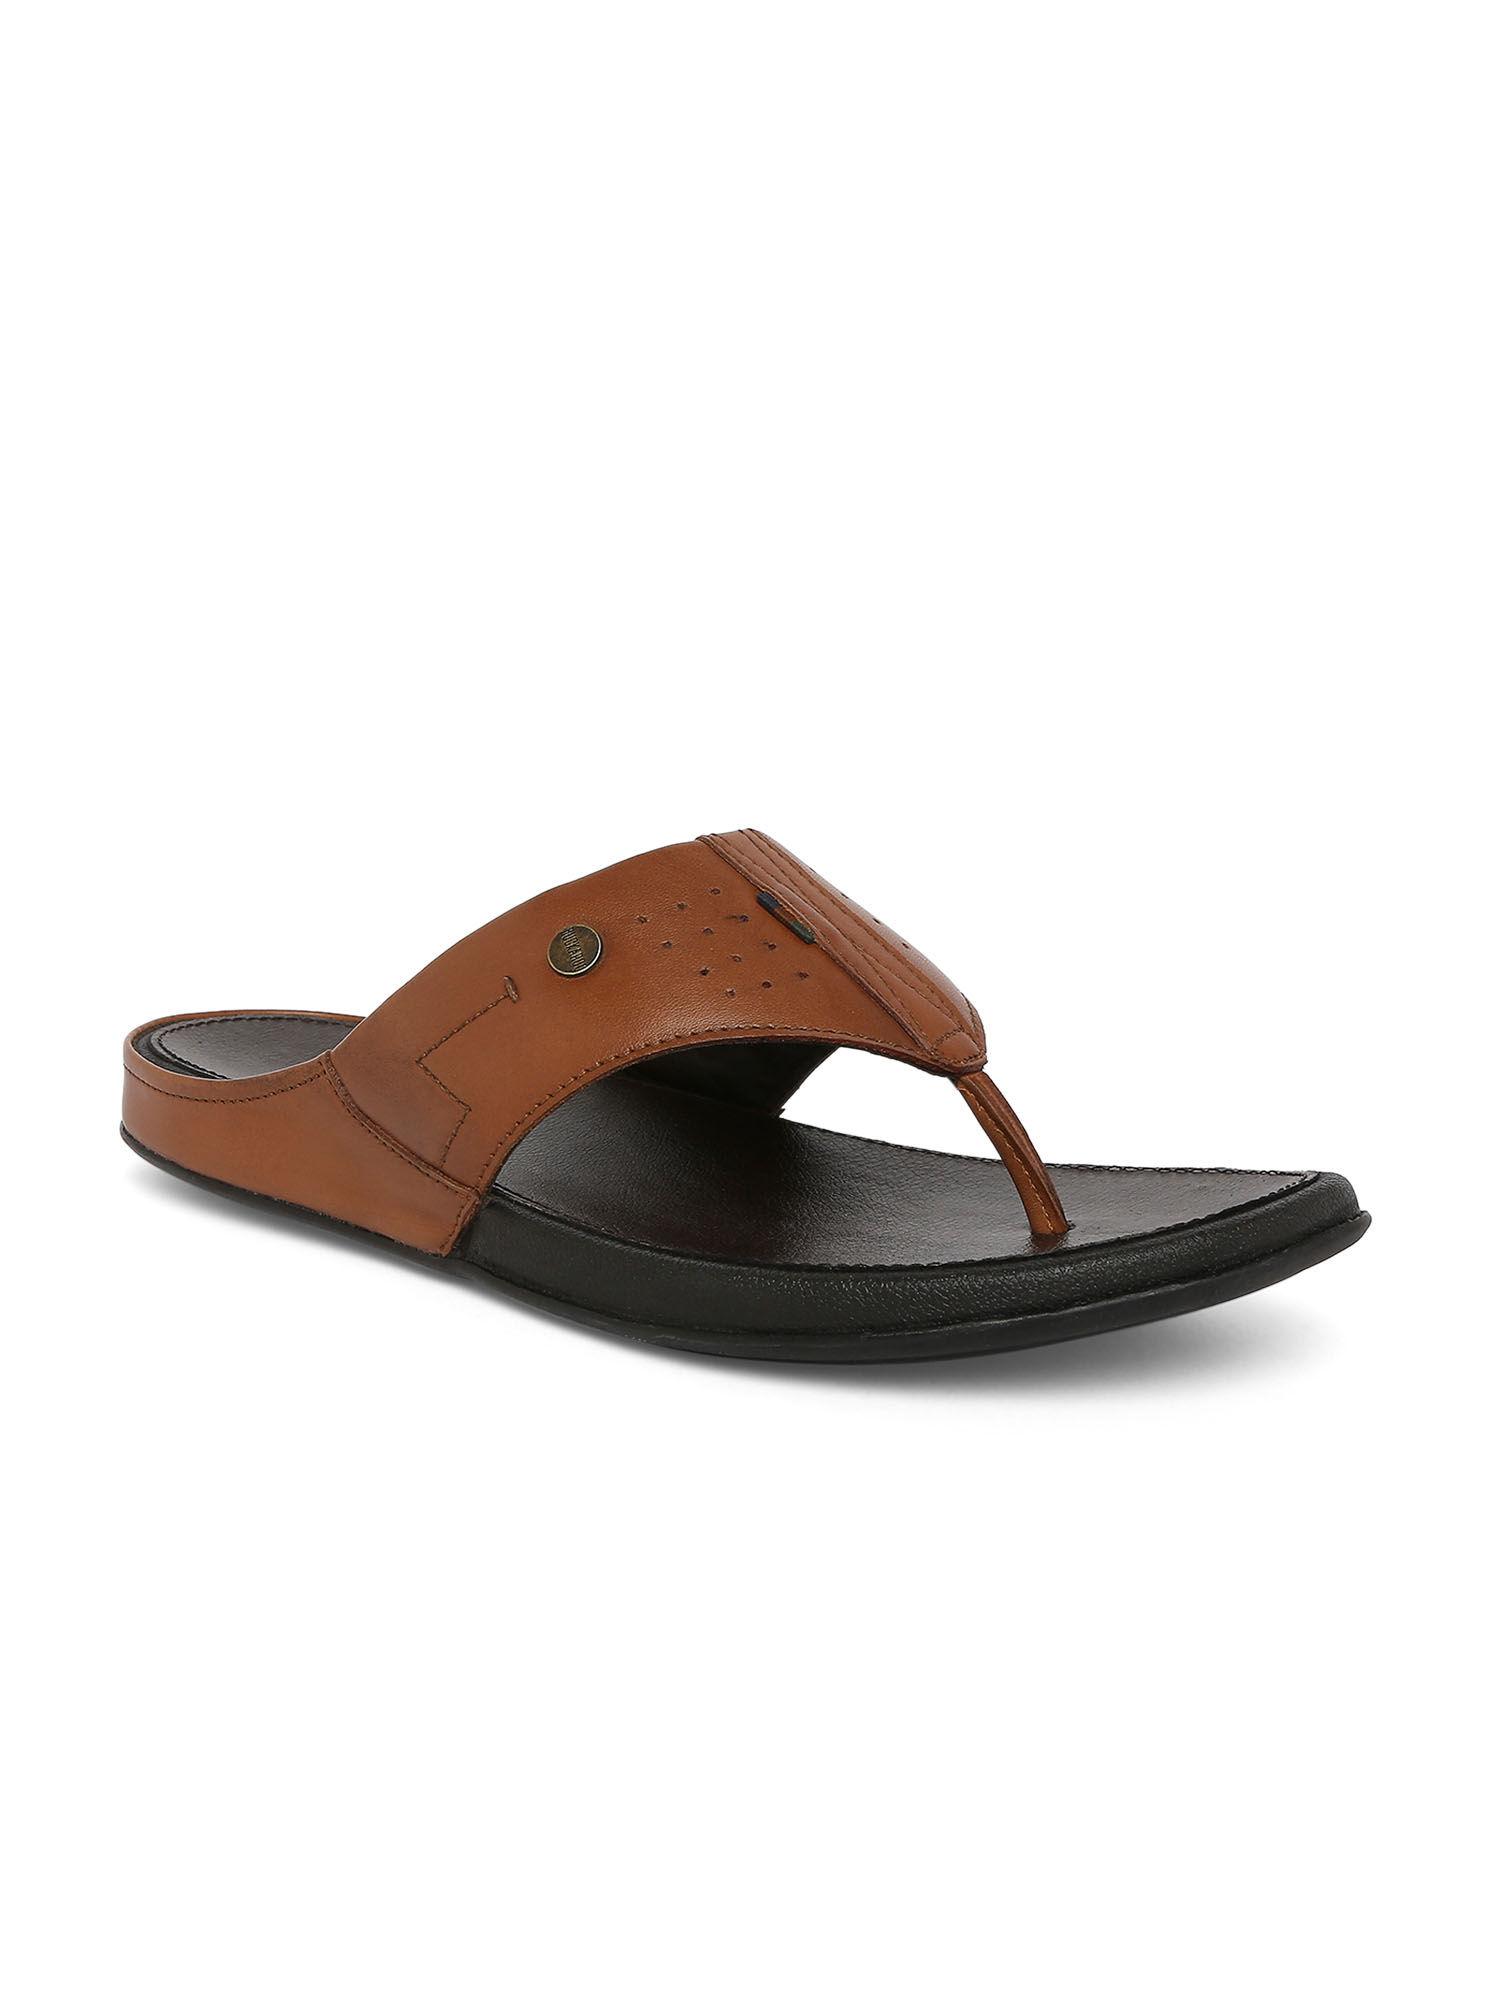 callan new anellien softy natural leather sandal chappal